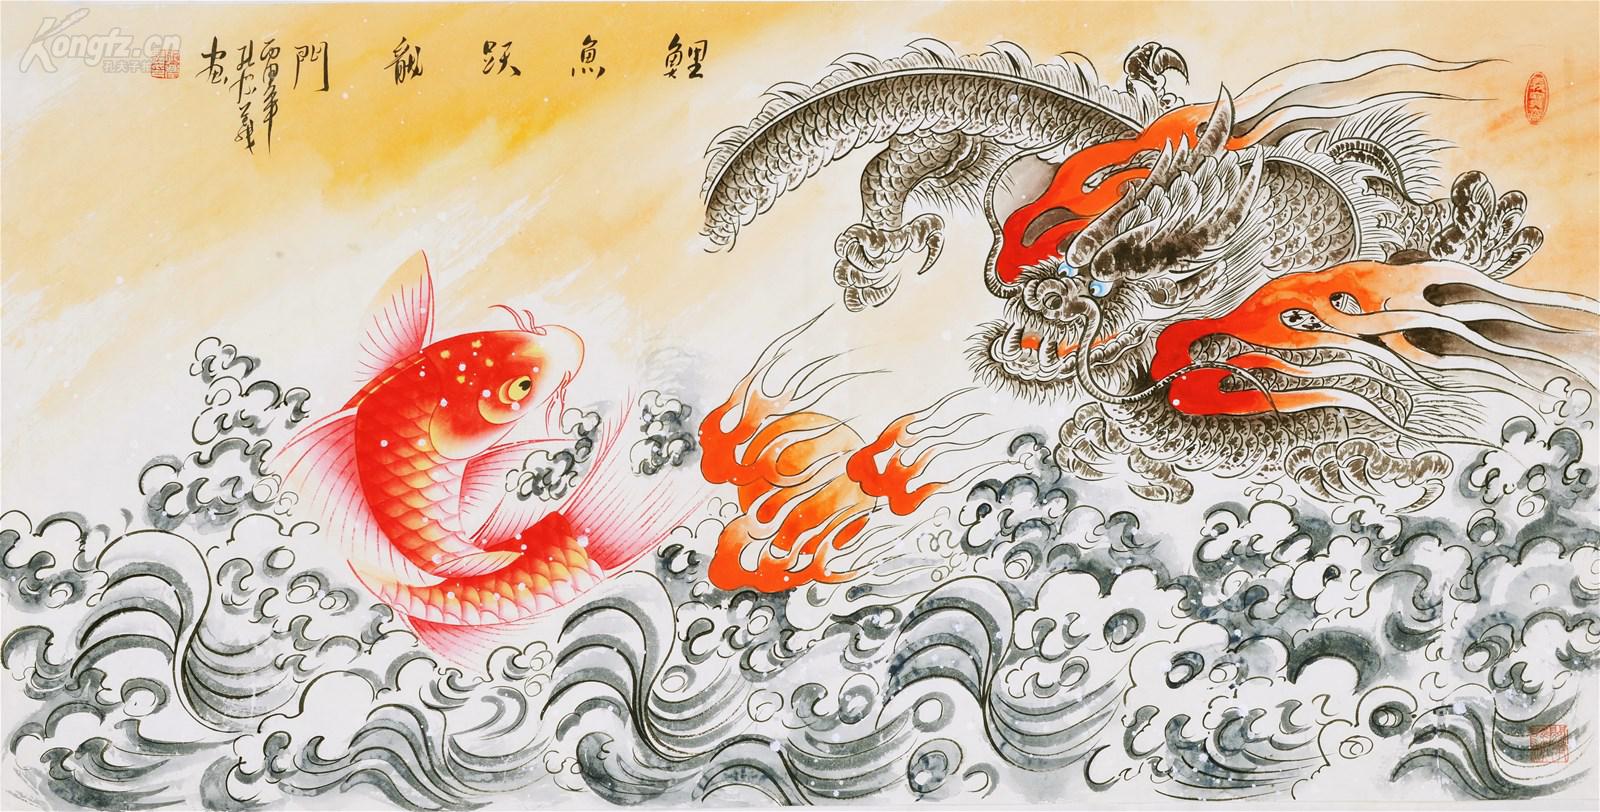 The best picture of a carp turning into a dragon - Lucky Wallpaper